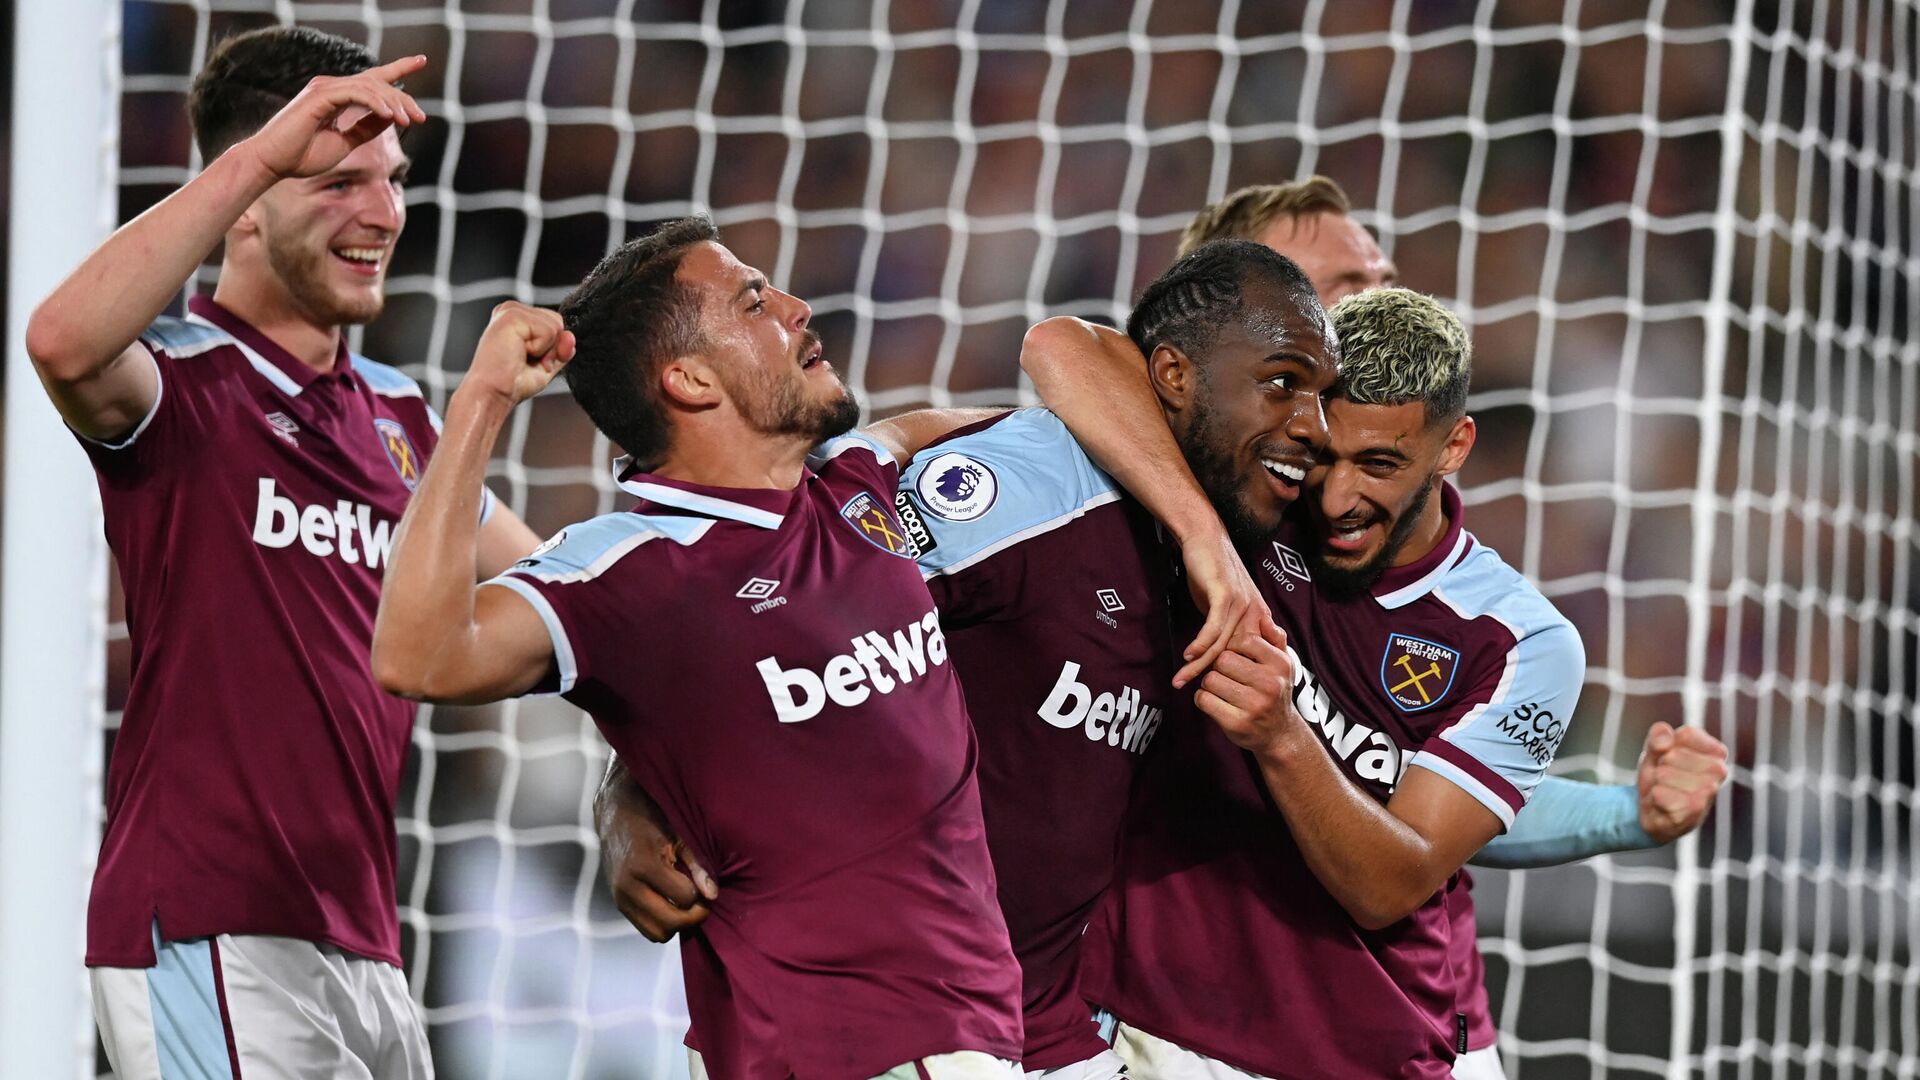 West Ham United's English midfielder Michail Antonio (2nd R) celebrates with teammates after scoring their fourth goal during the English Premier League football match between West Ham United and Leicester City at The London Stadium, in east London on August 23, 2021. (Photo by Glyn KIRK / AFP) / RESTRICTED TO EDITORIAL USE. No use with unauthorized audio, video, data, fixture lists, club/league logos or 'live' services. Online in-match use limited to 120 images. An additional 40 images may be used in extra time. No video emulation. Social media in-match use limited to 120 images. An additional 40 images may be used in extra time. No use in betting publications, games or single club/league/player publications. / - РИА Новости, 1920, 24.08.2021